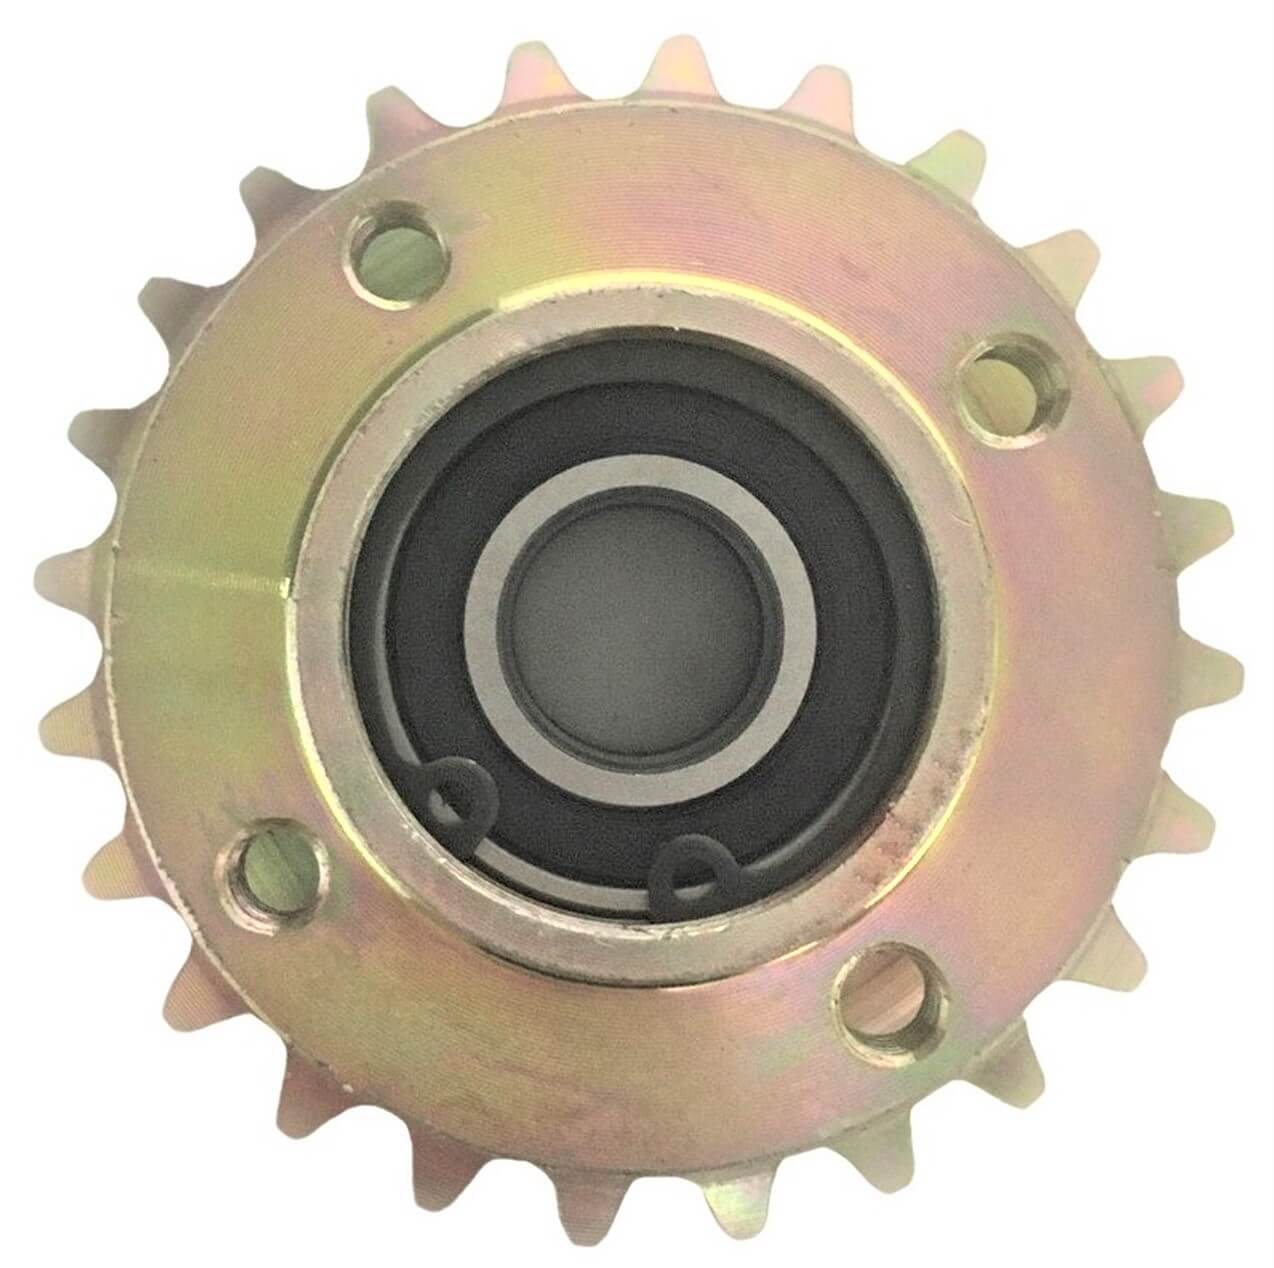 Front Sprocket #35 24TH Fits Coleman CK100, GK80, Motovox, + other small GoKarts - Click Image to Close